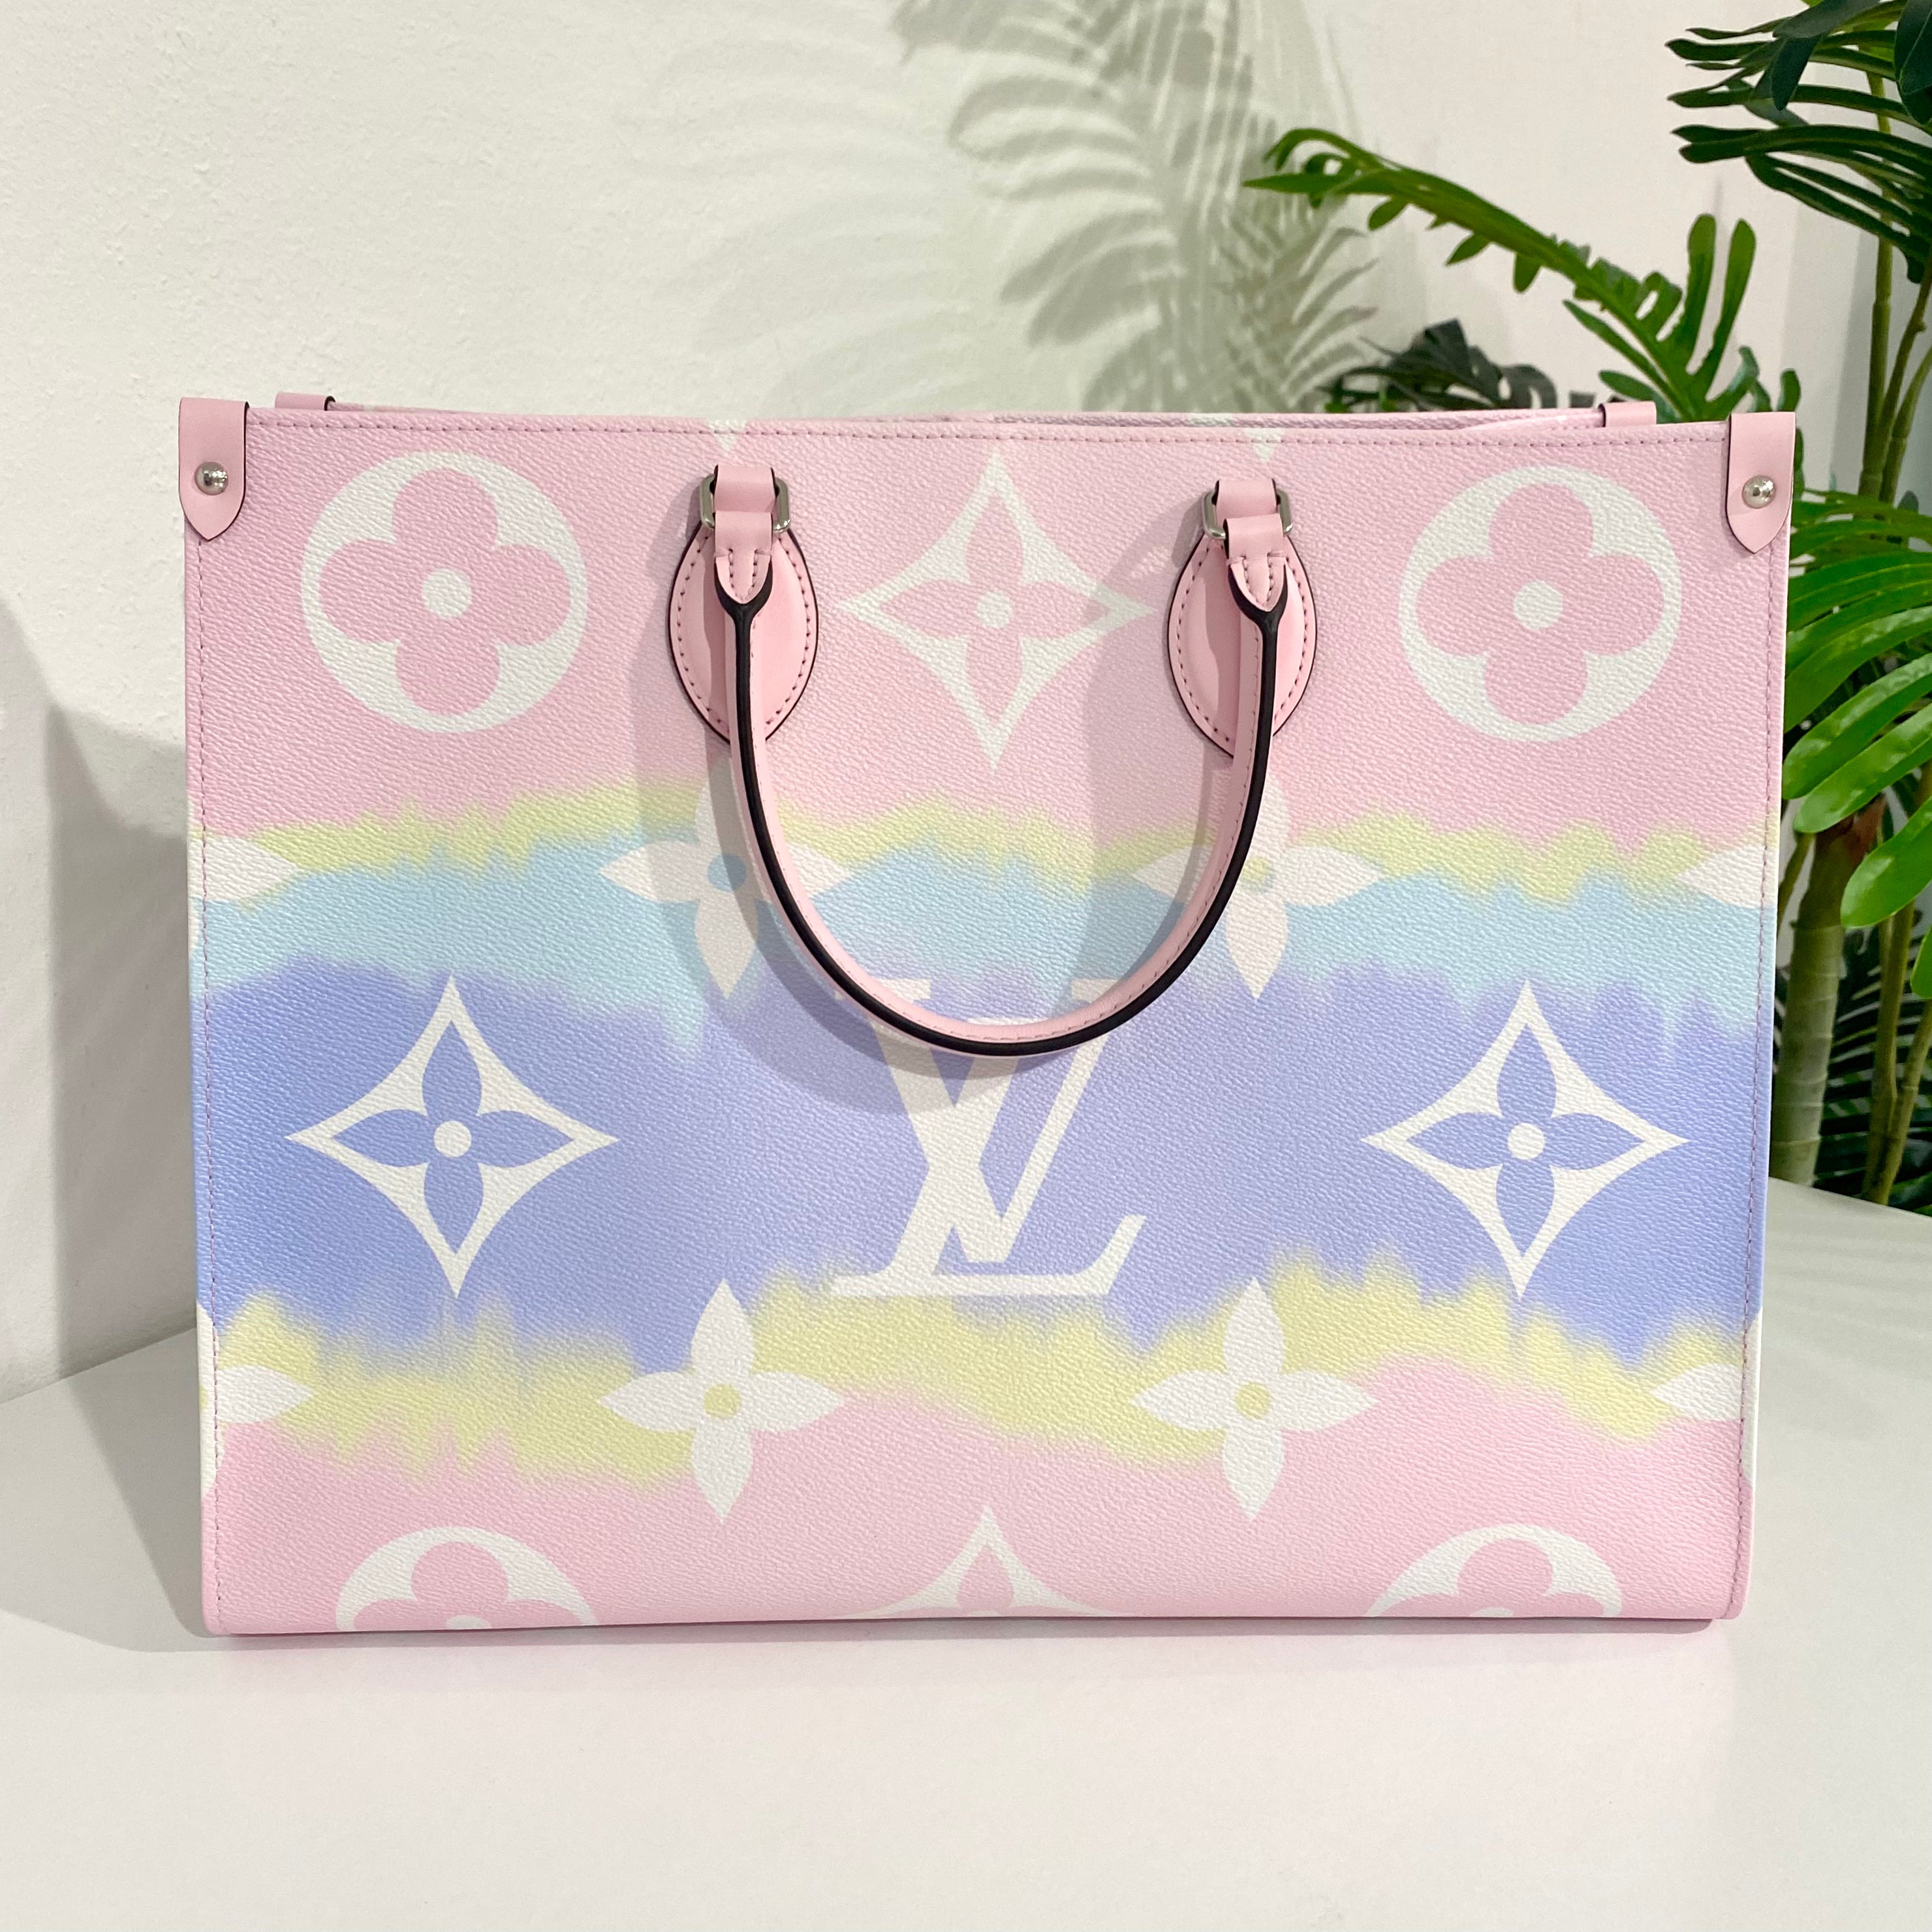 LV Escale Tote Bag - Purple & Pink Pastel Leather Women's Large